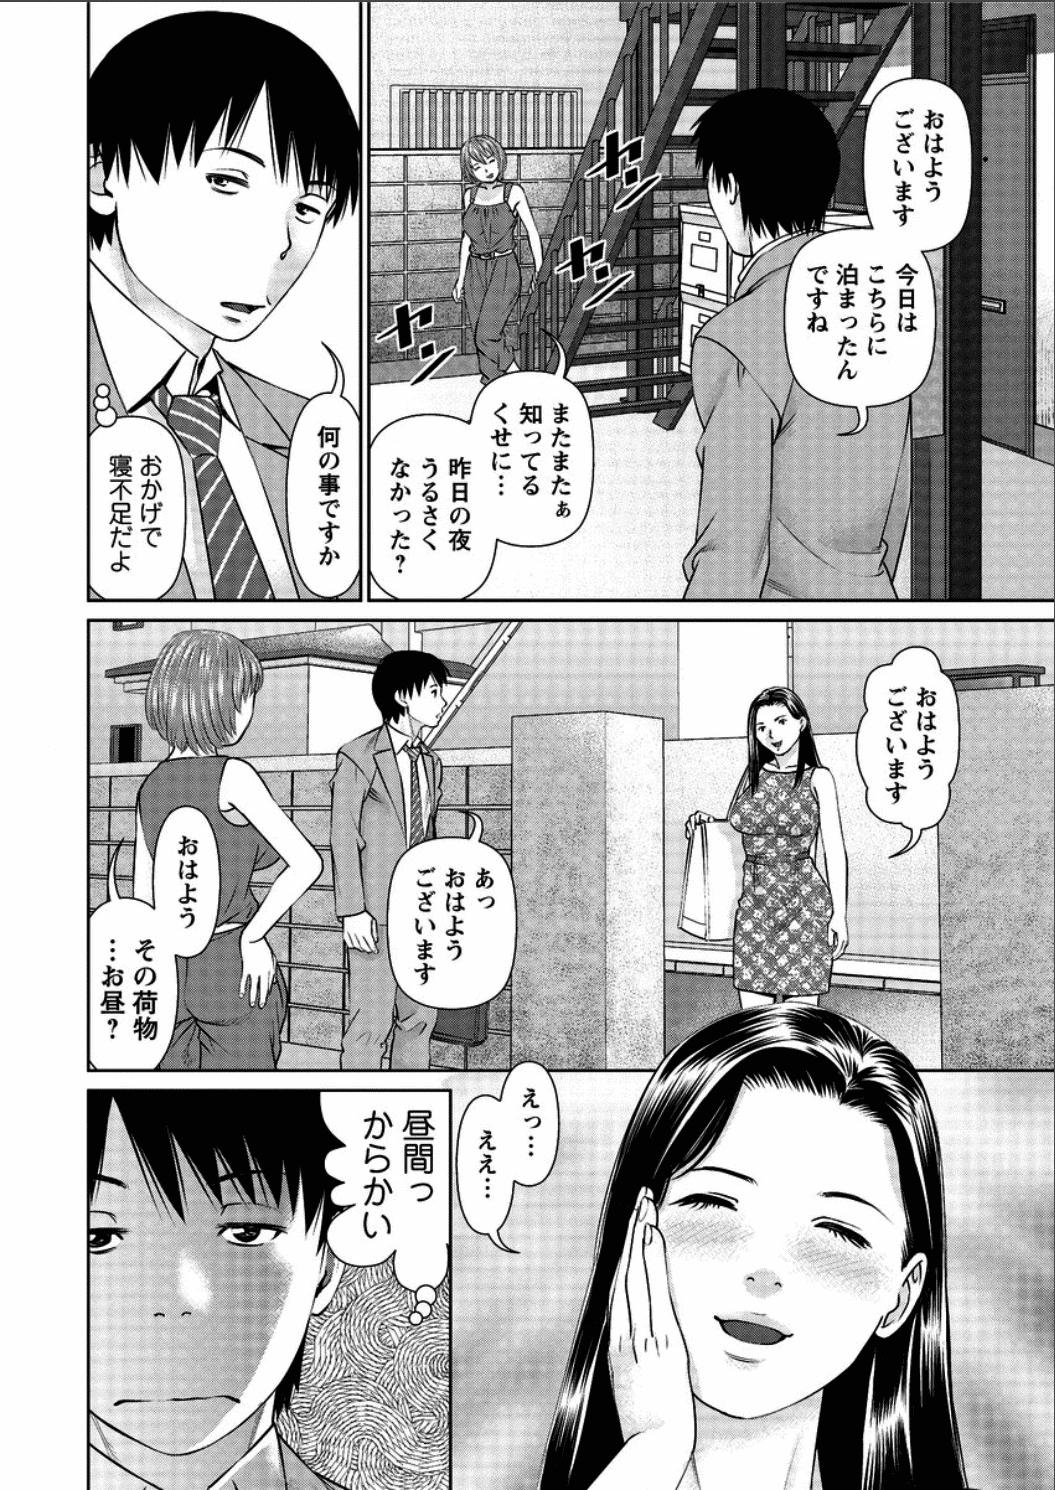 Doggystyle [Usi] Aijin Apart - Lover's Apartment Ch. 1-2 Fucking - Page 6